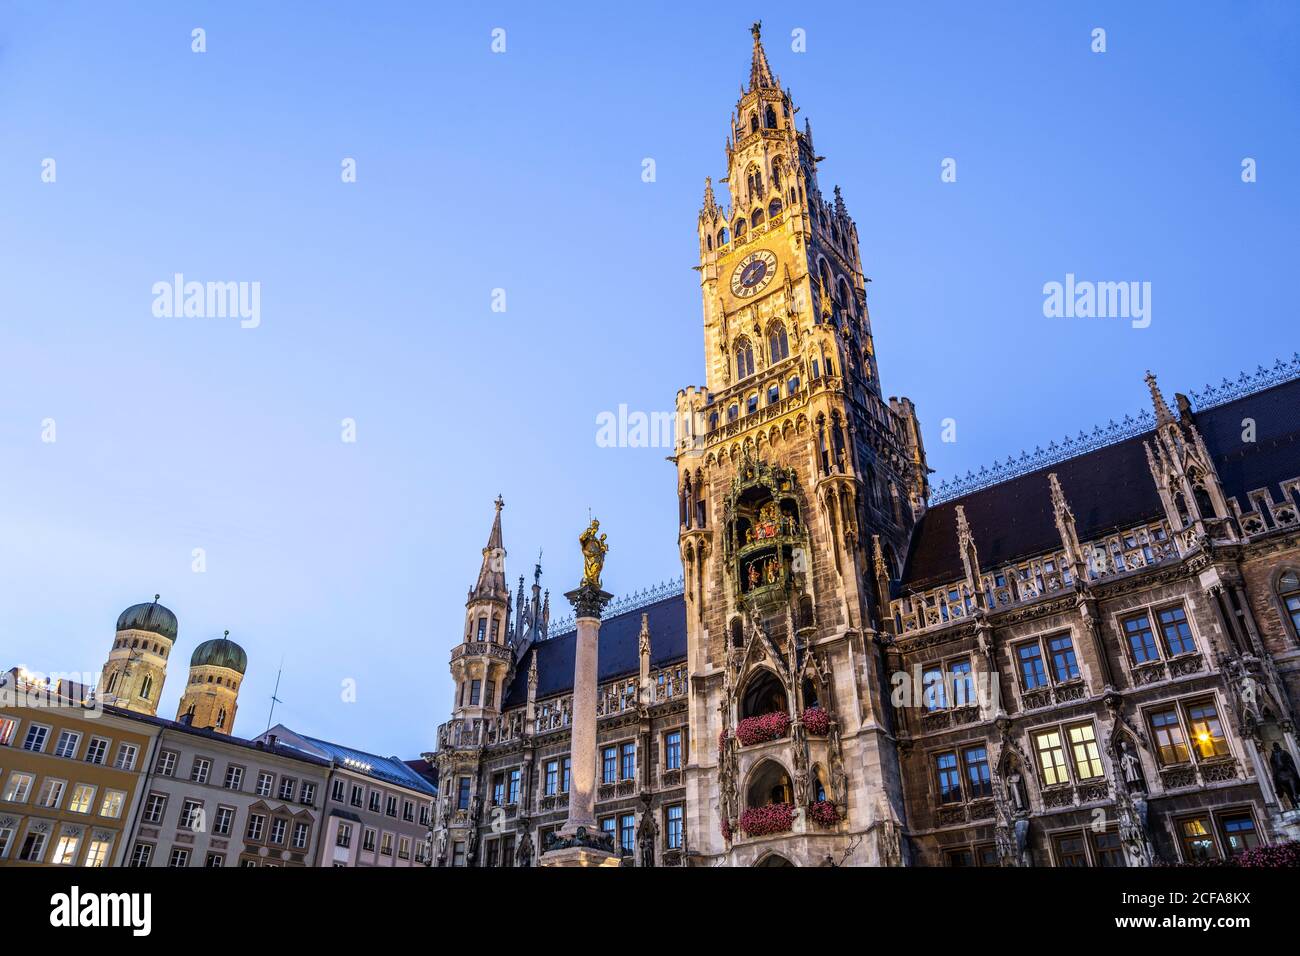 New Town Hall (featuring clock tower and Glockenspiel), domed towers of Frauenkirche (left), Marienplatz, Munich, Germany Stock Photo